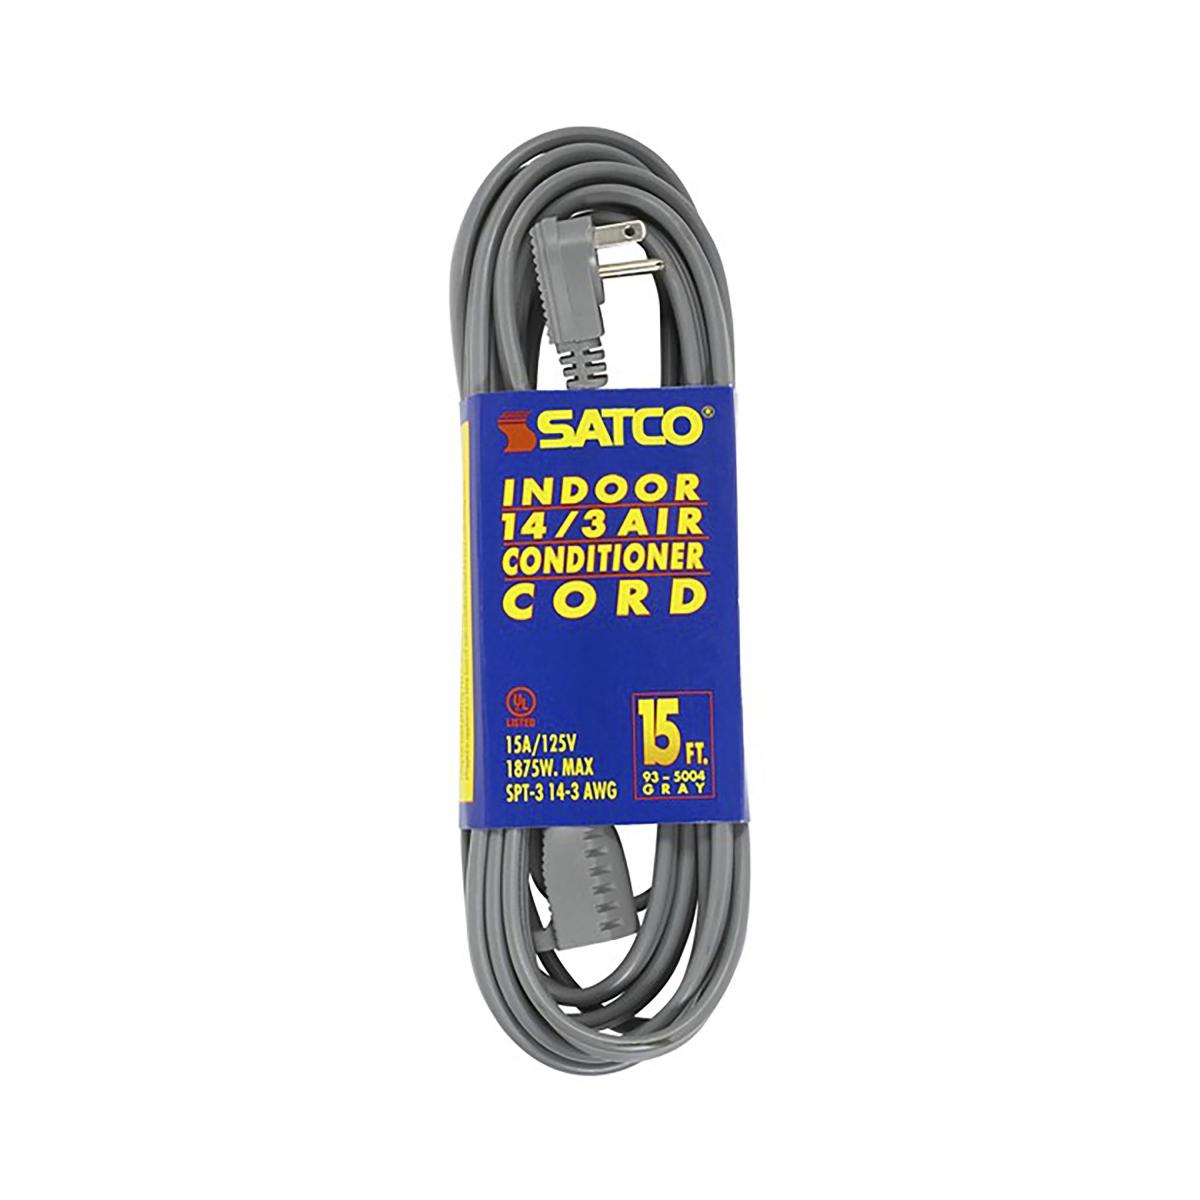 Satco 93-5004 15 Foot Gray Heavy Duty Air Conditioner/Appliance Cord 14/3 Ga. SPT-3 Gray Cord With Sleeve 15A-125V 1875W